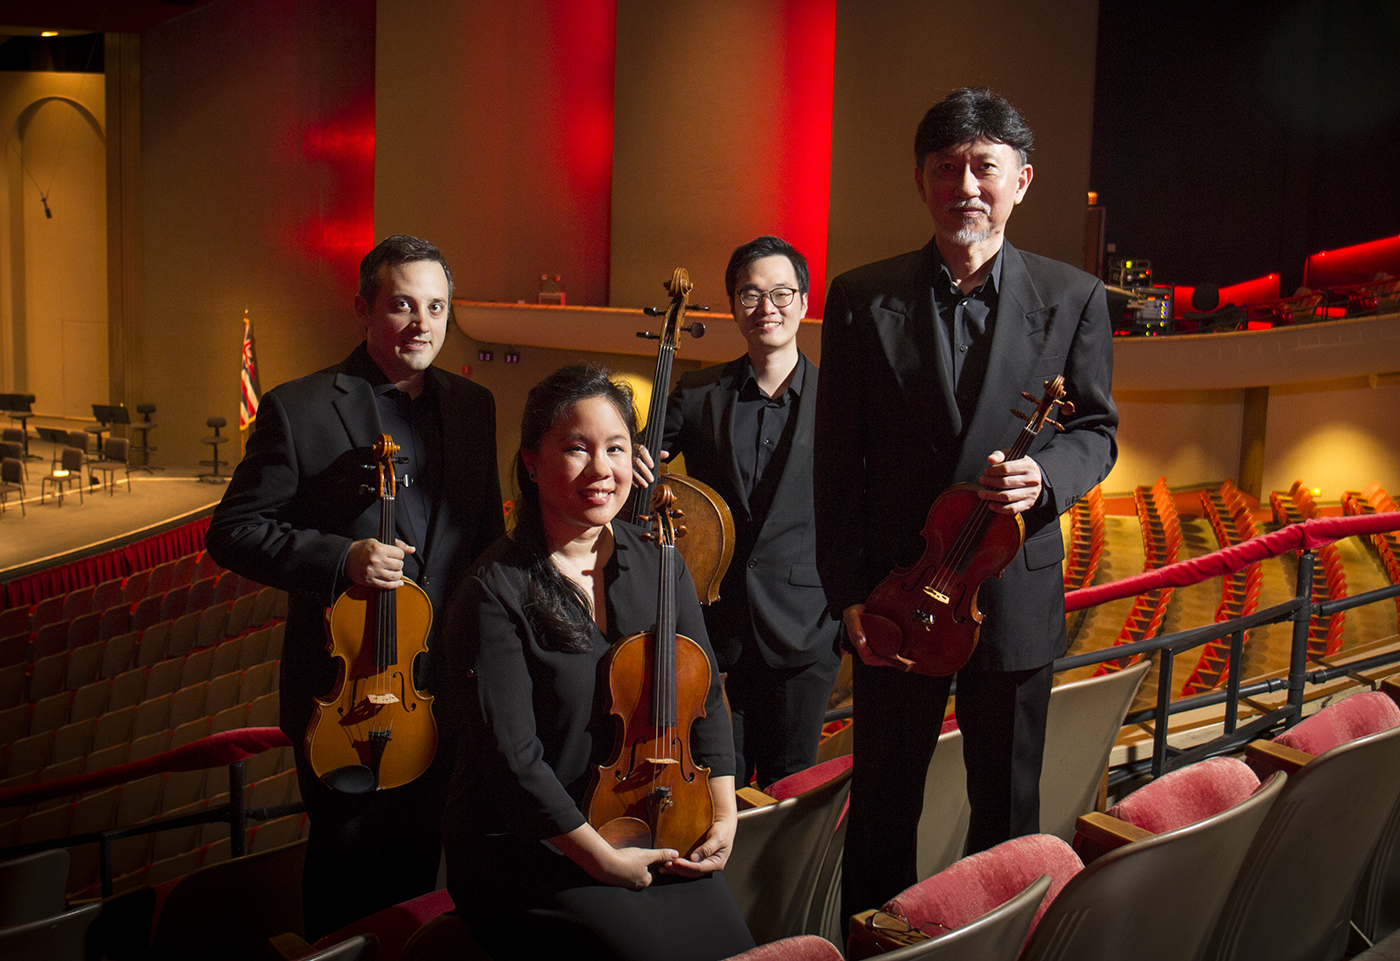 Members of the Chamber Music Hawaii's Galliard String Quartet posing in the audience seating with the stage behind them.